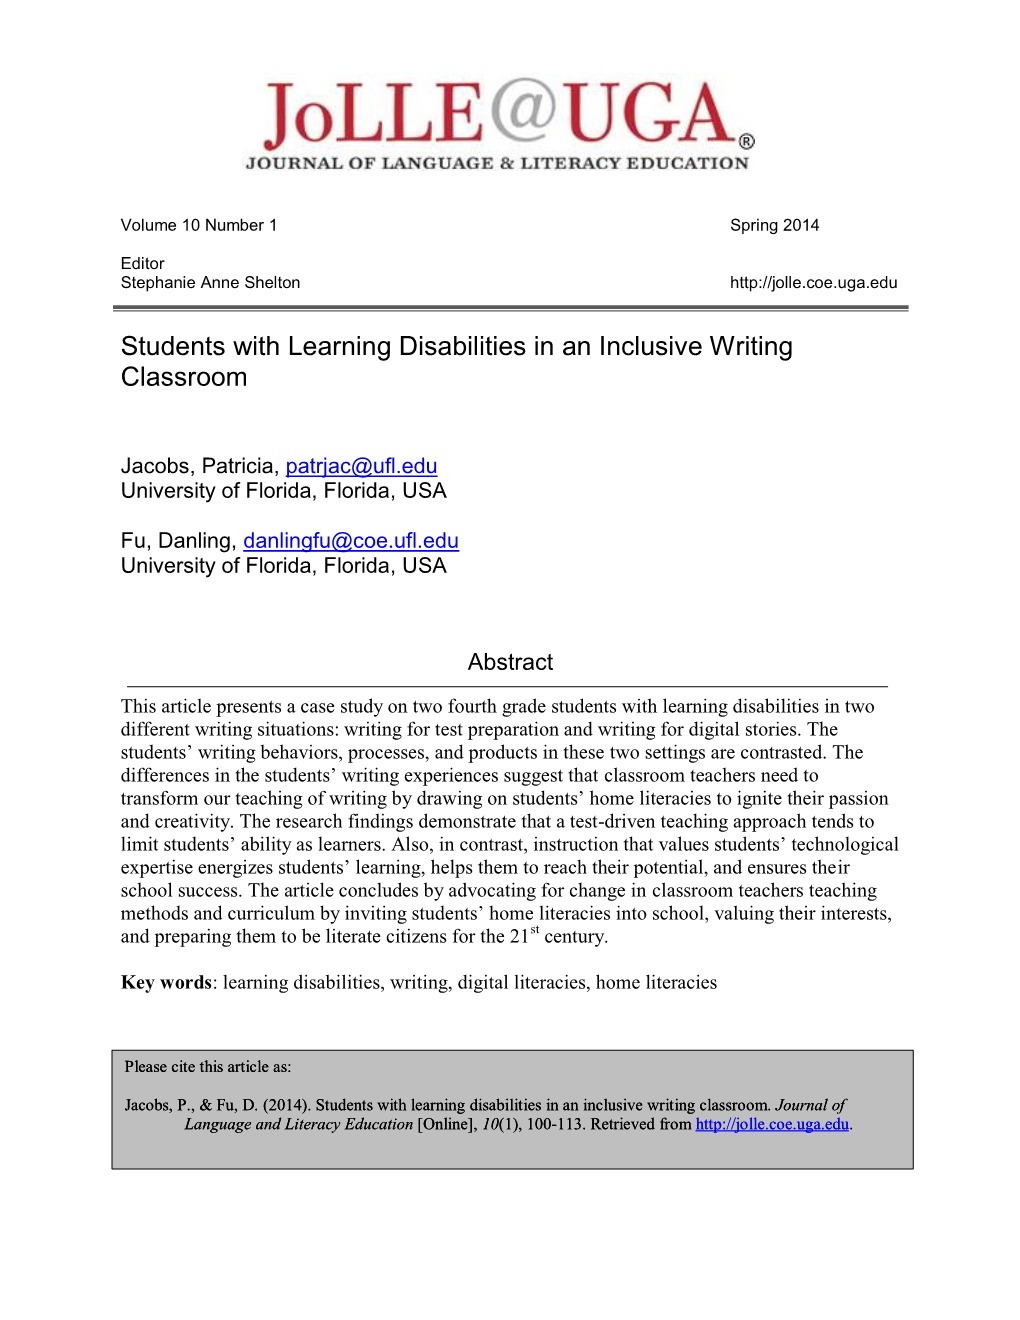 Students with Learning Disabilities in an Inclusive Writing Classroom